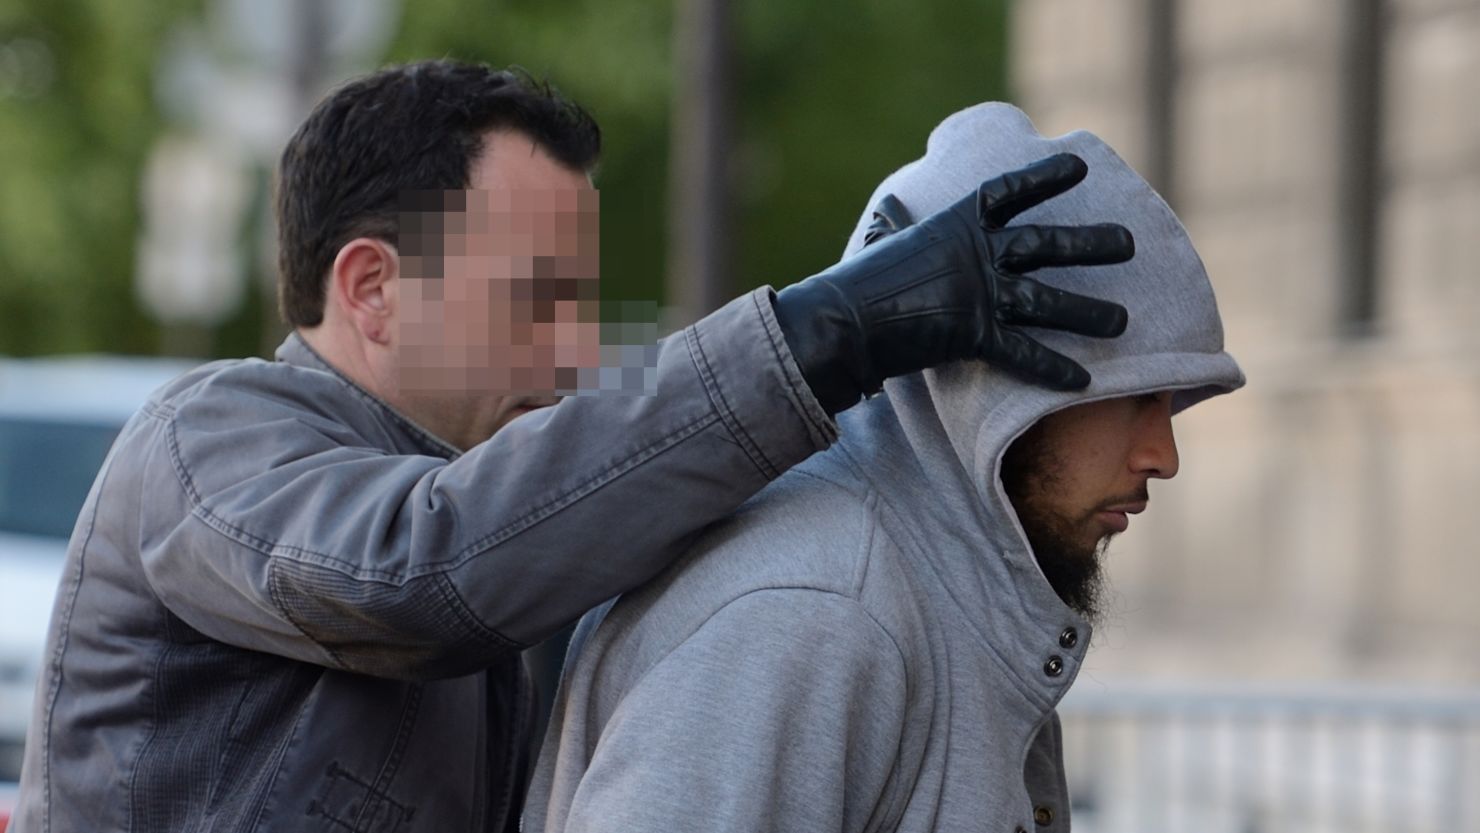 The suspected perpetrator (R) of the Sunday attack on a soldier is escorted to police headquarters in Paris on Wednesday.